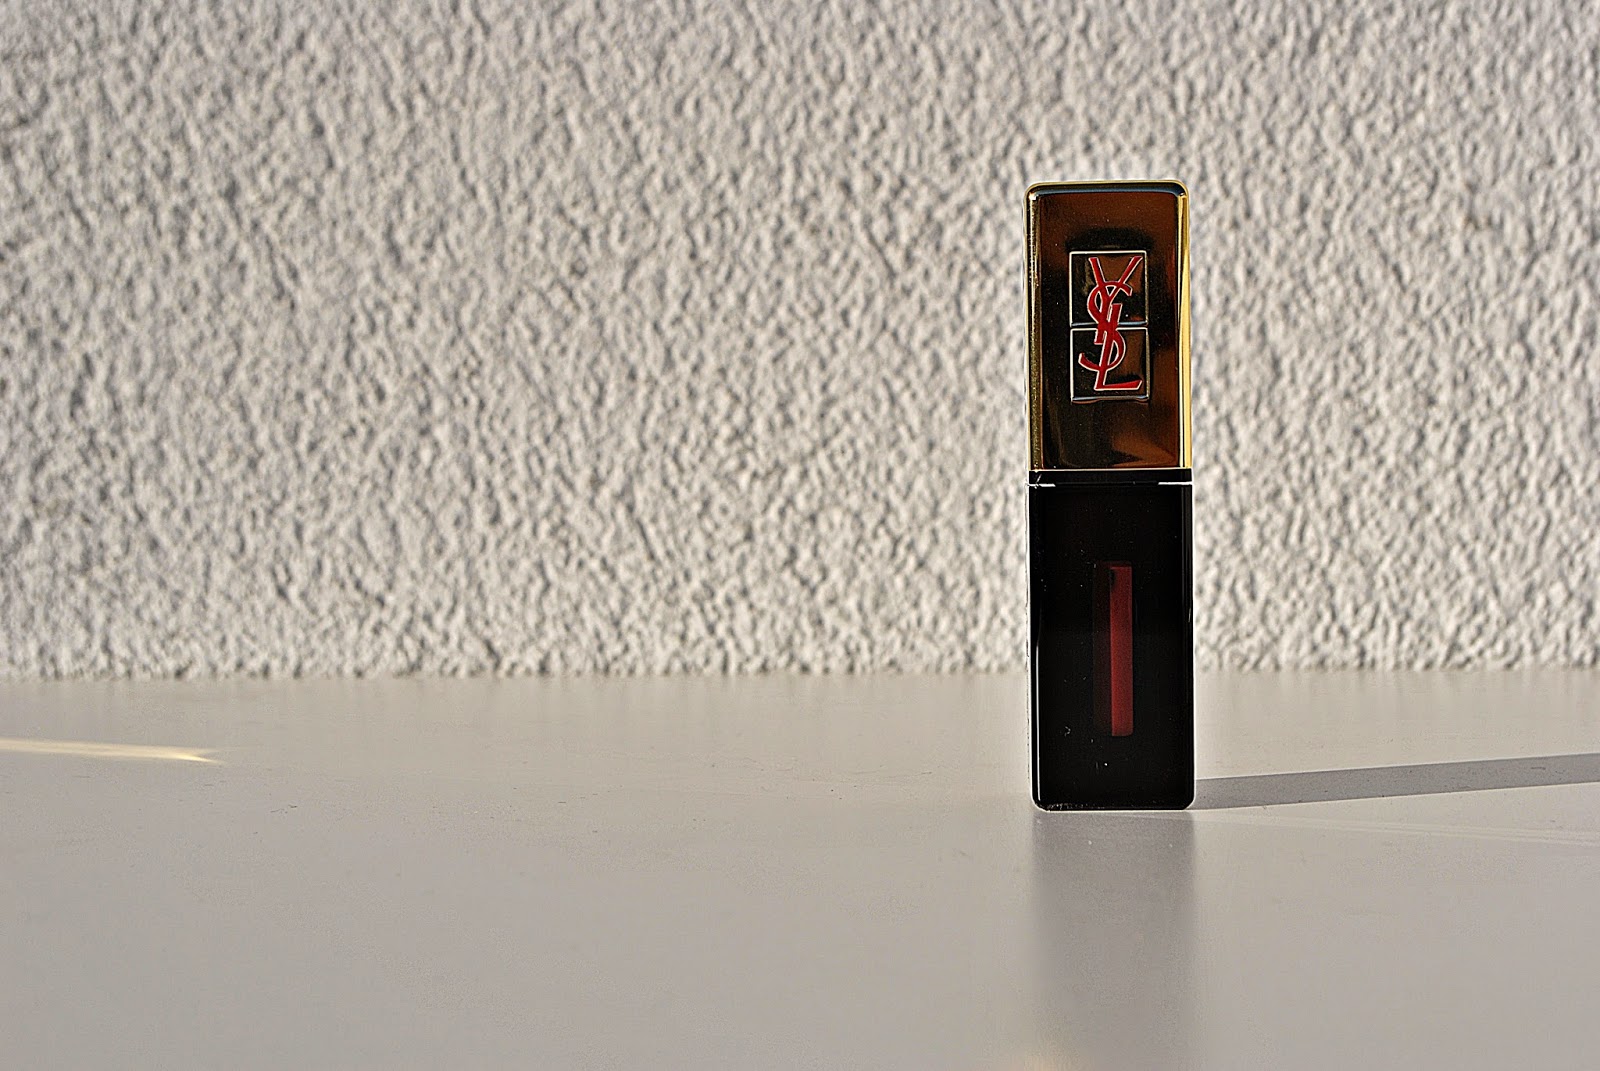 YSL ROUGE PUR COUTURE VERNIS A LEVRES - 2 BRUN GLACE